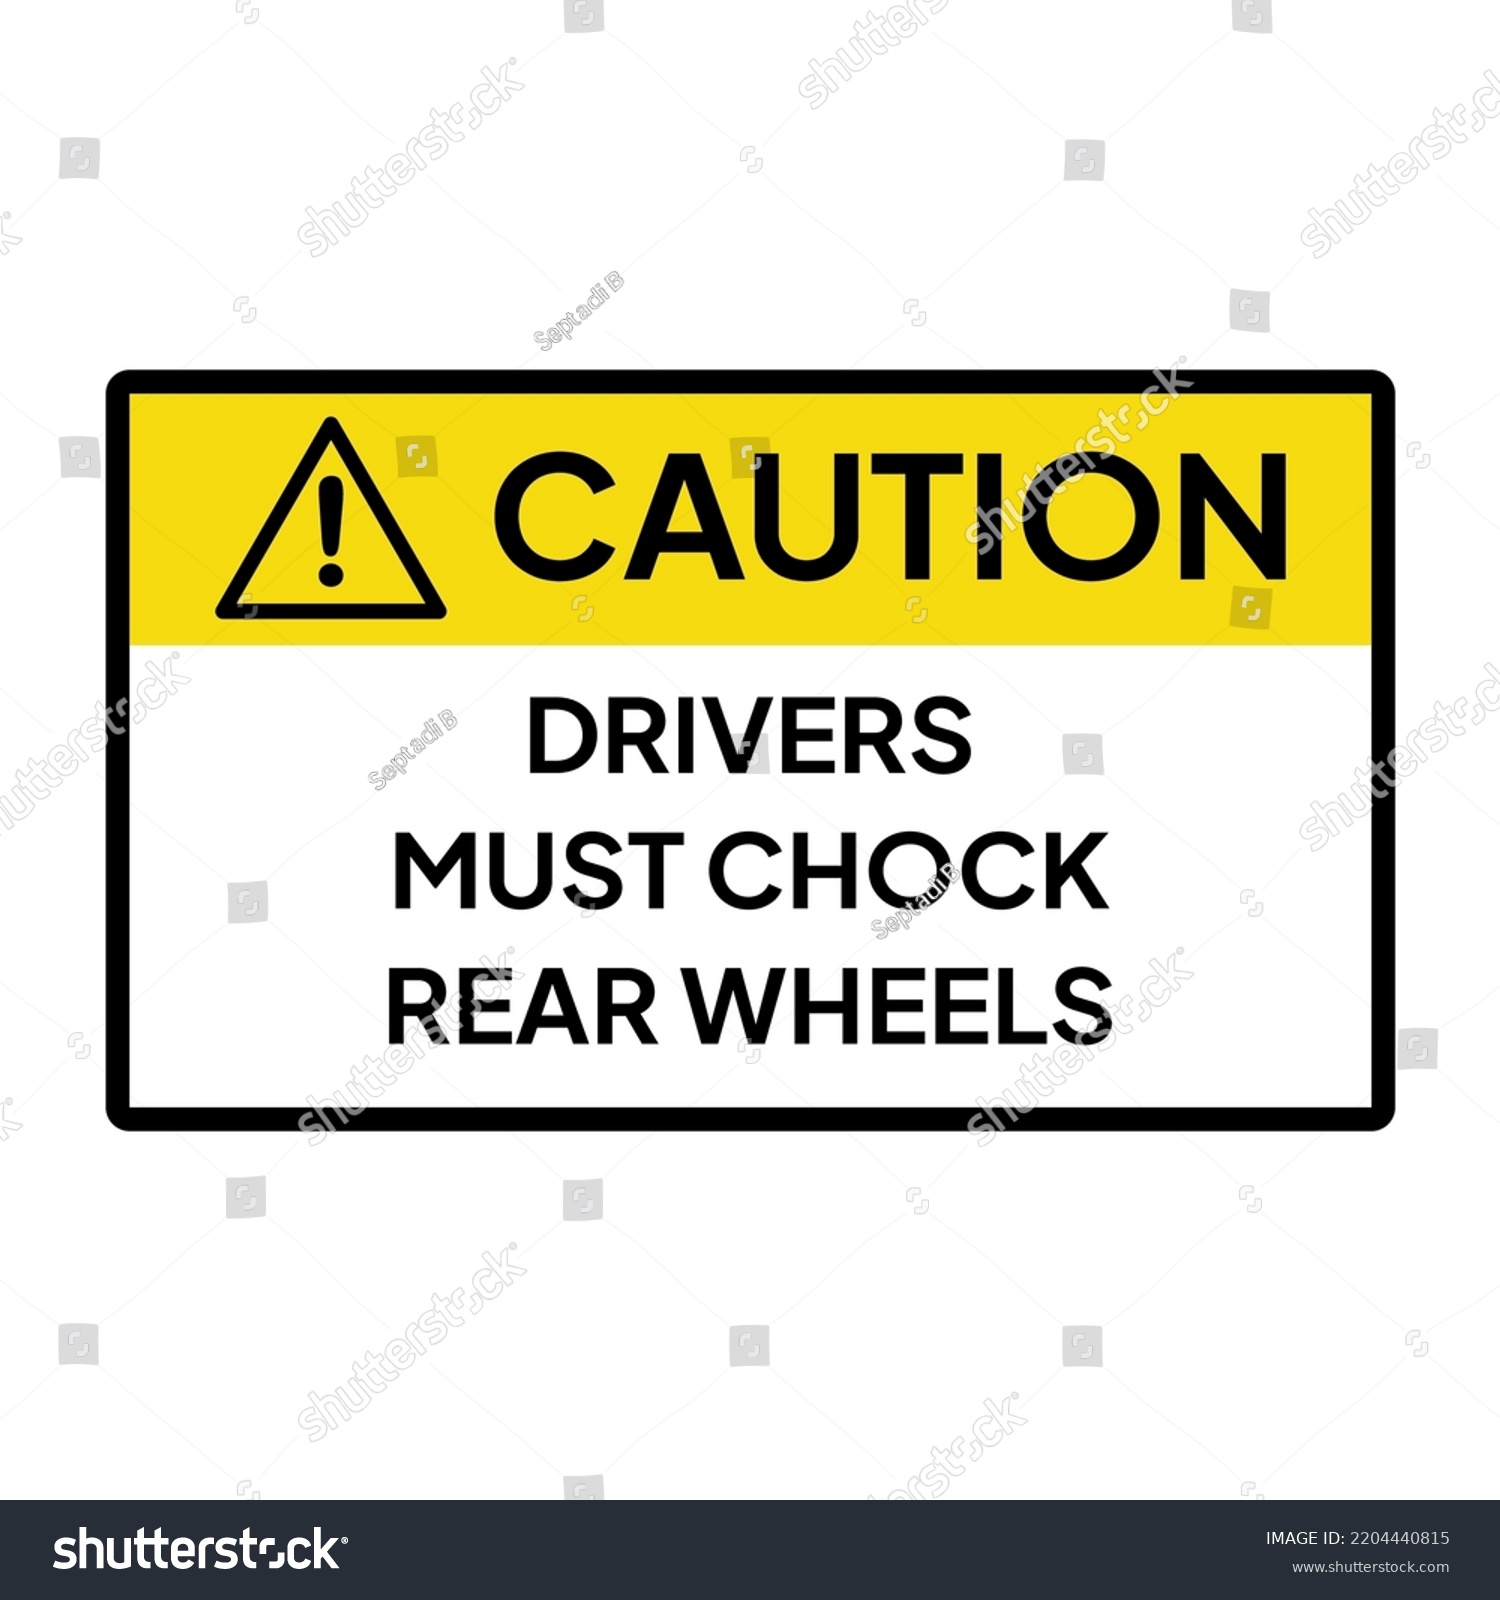 SVG of Warning sign or label for industrial.  Caution or notice for drivers must chock rear wheels. svg